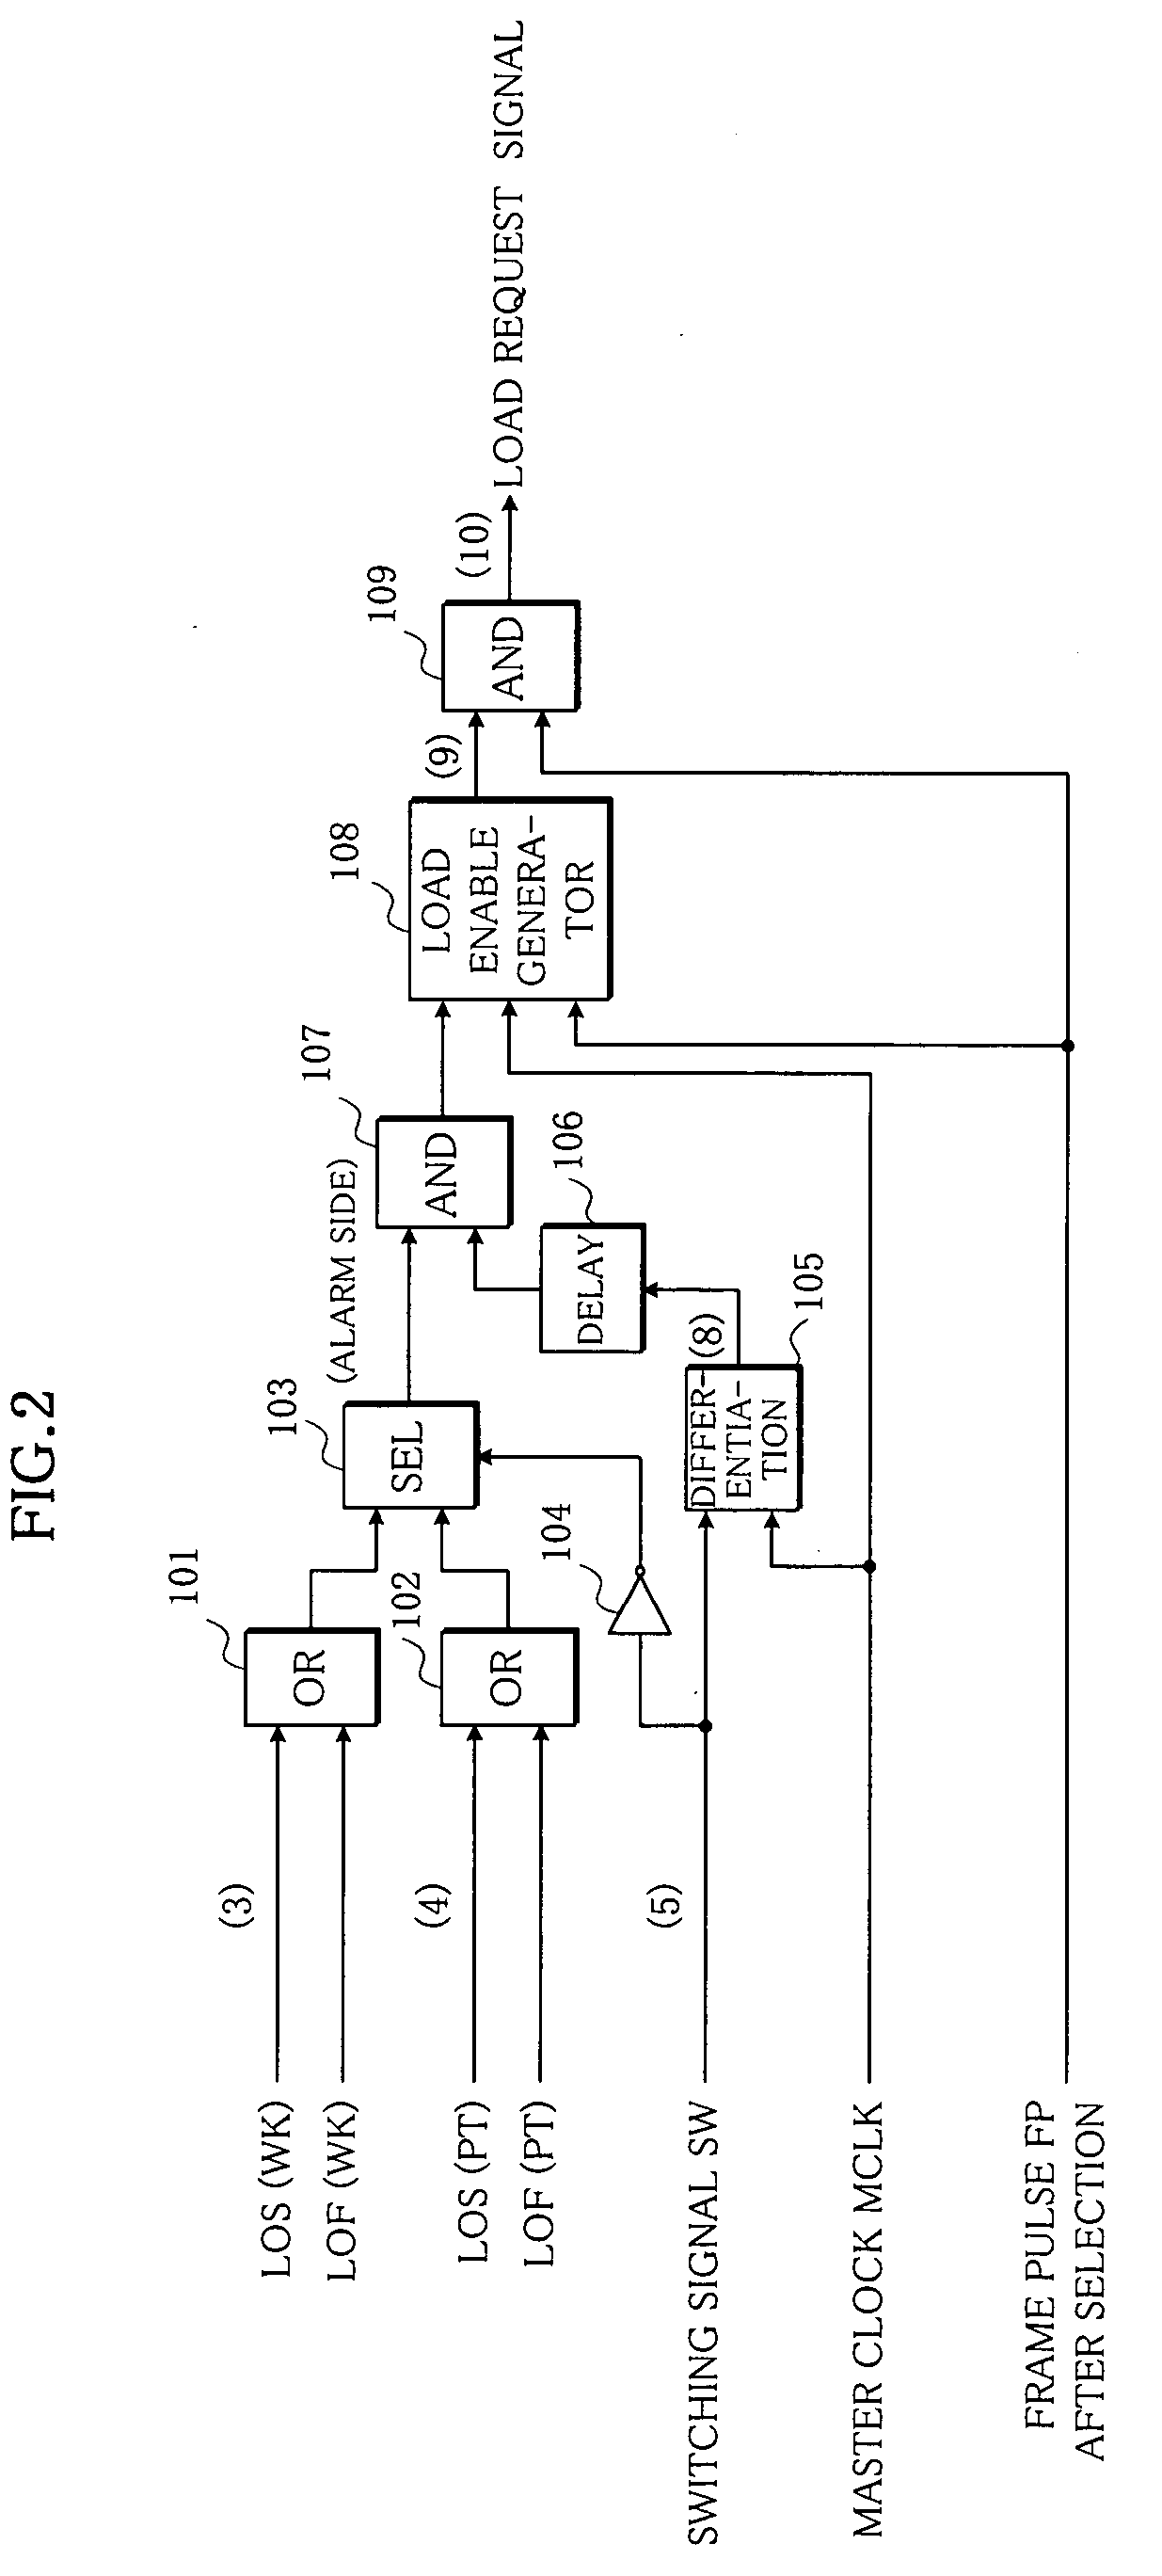 Method and circuit for timing pulse generation